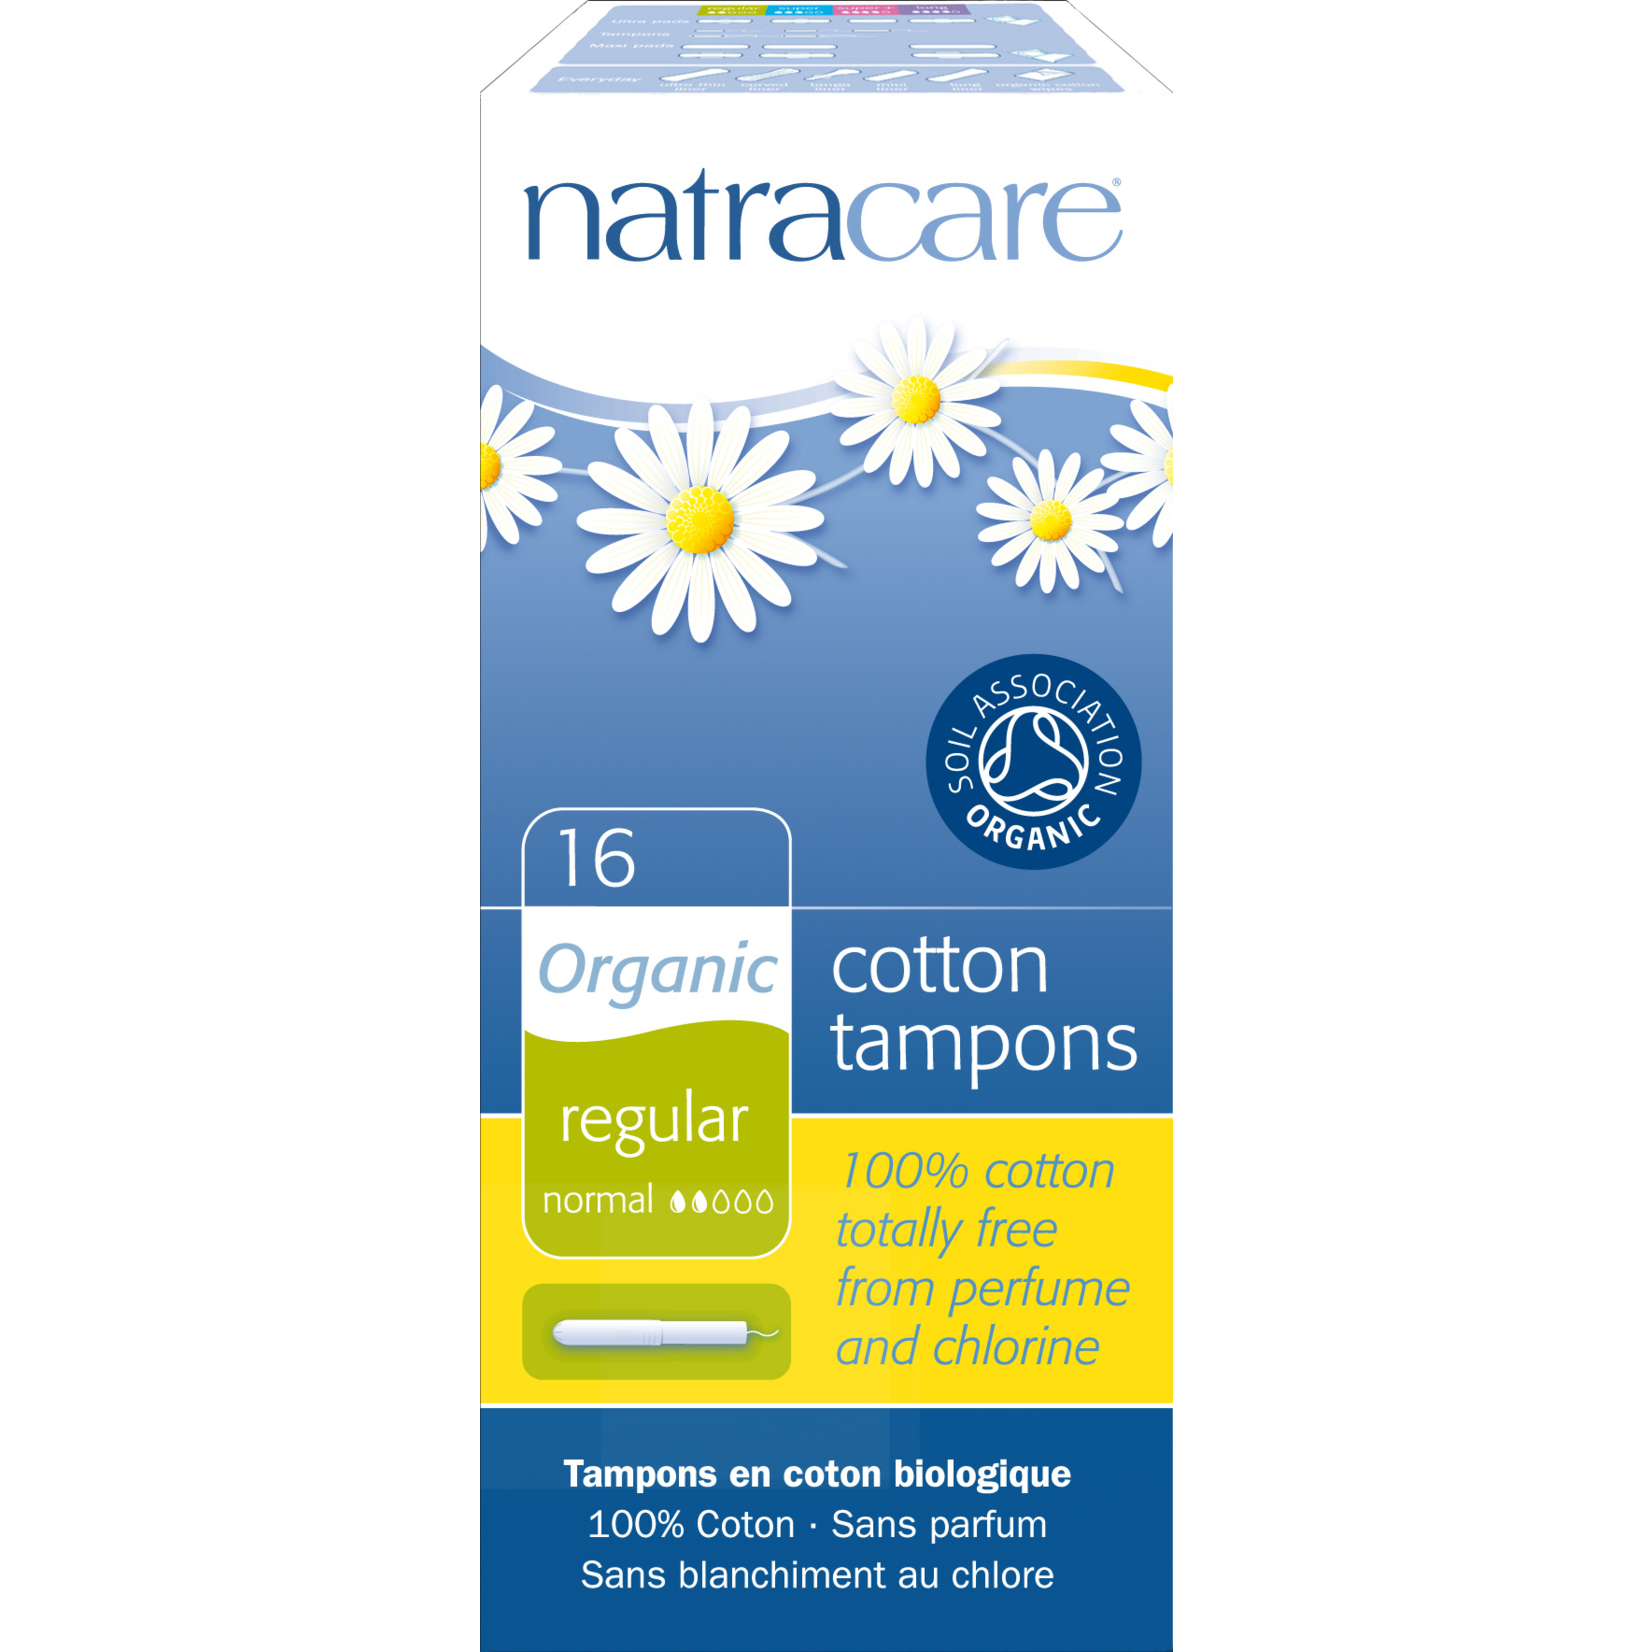 NATRA CARE NATRACARE TAMPONS - REGULAR - WITH APPLICATOR 16 COUNT